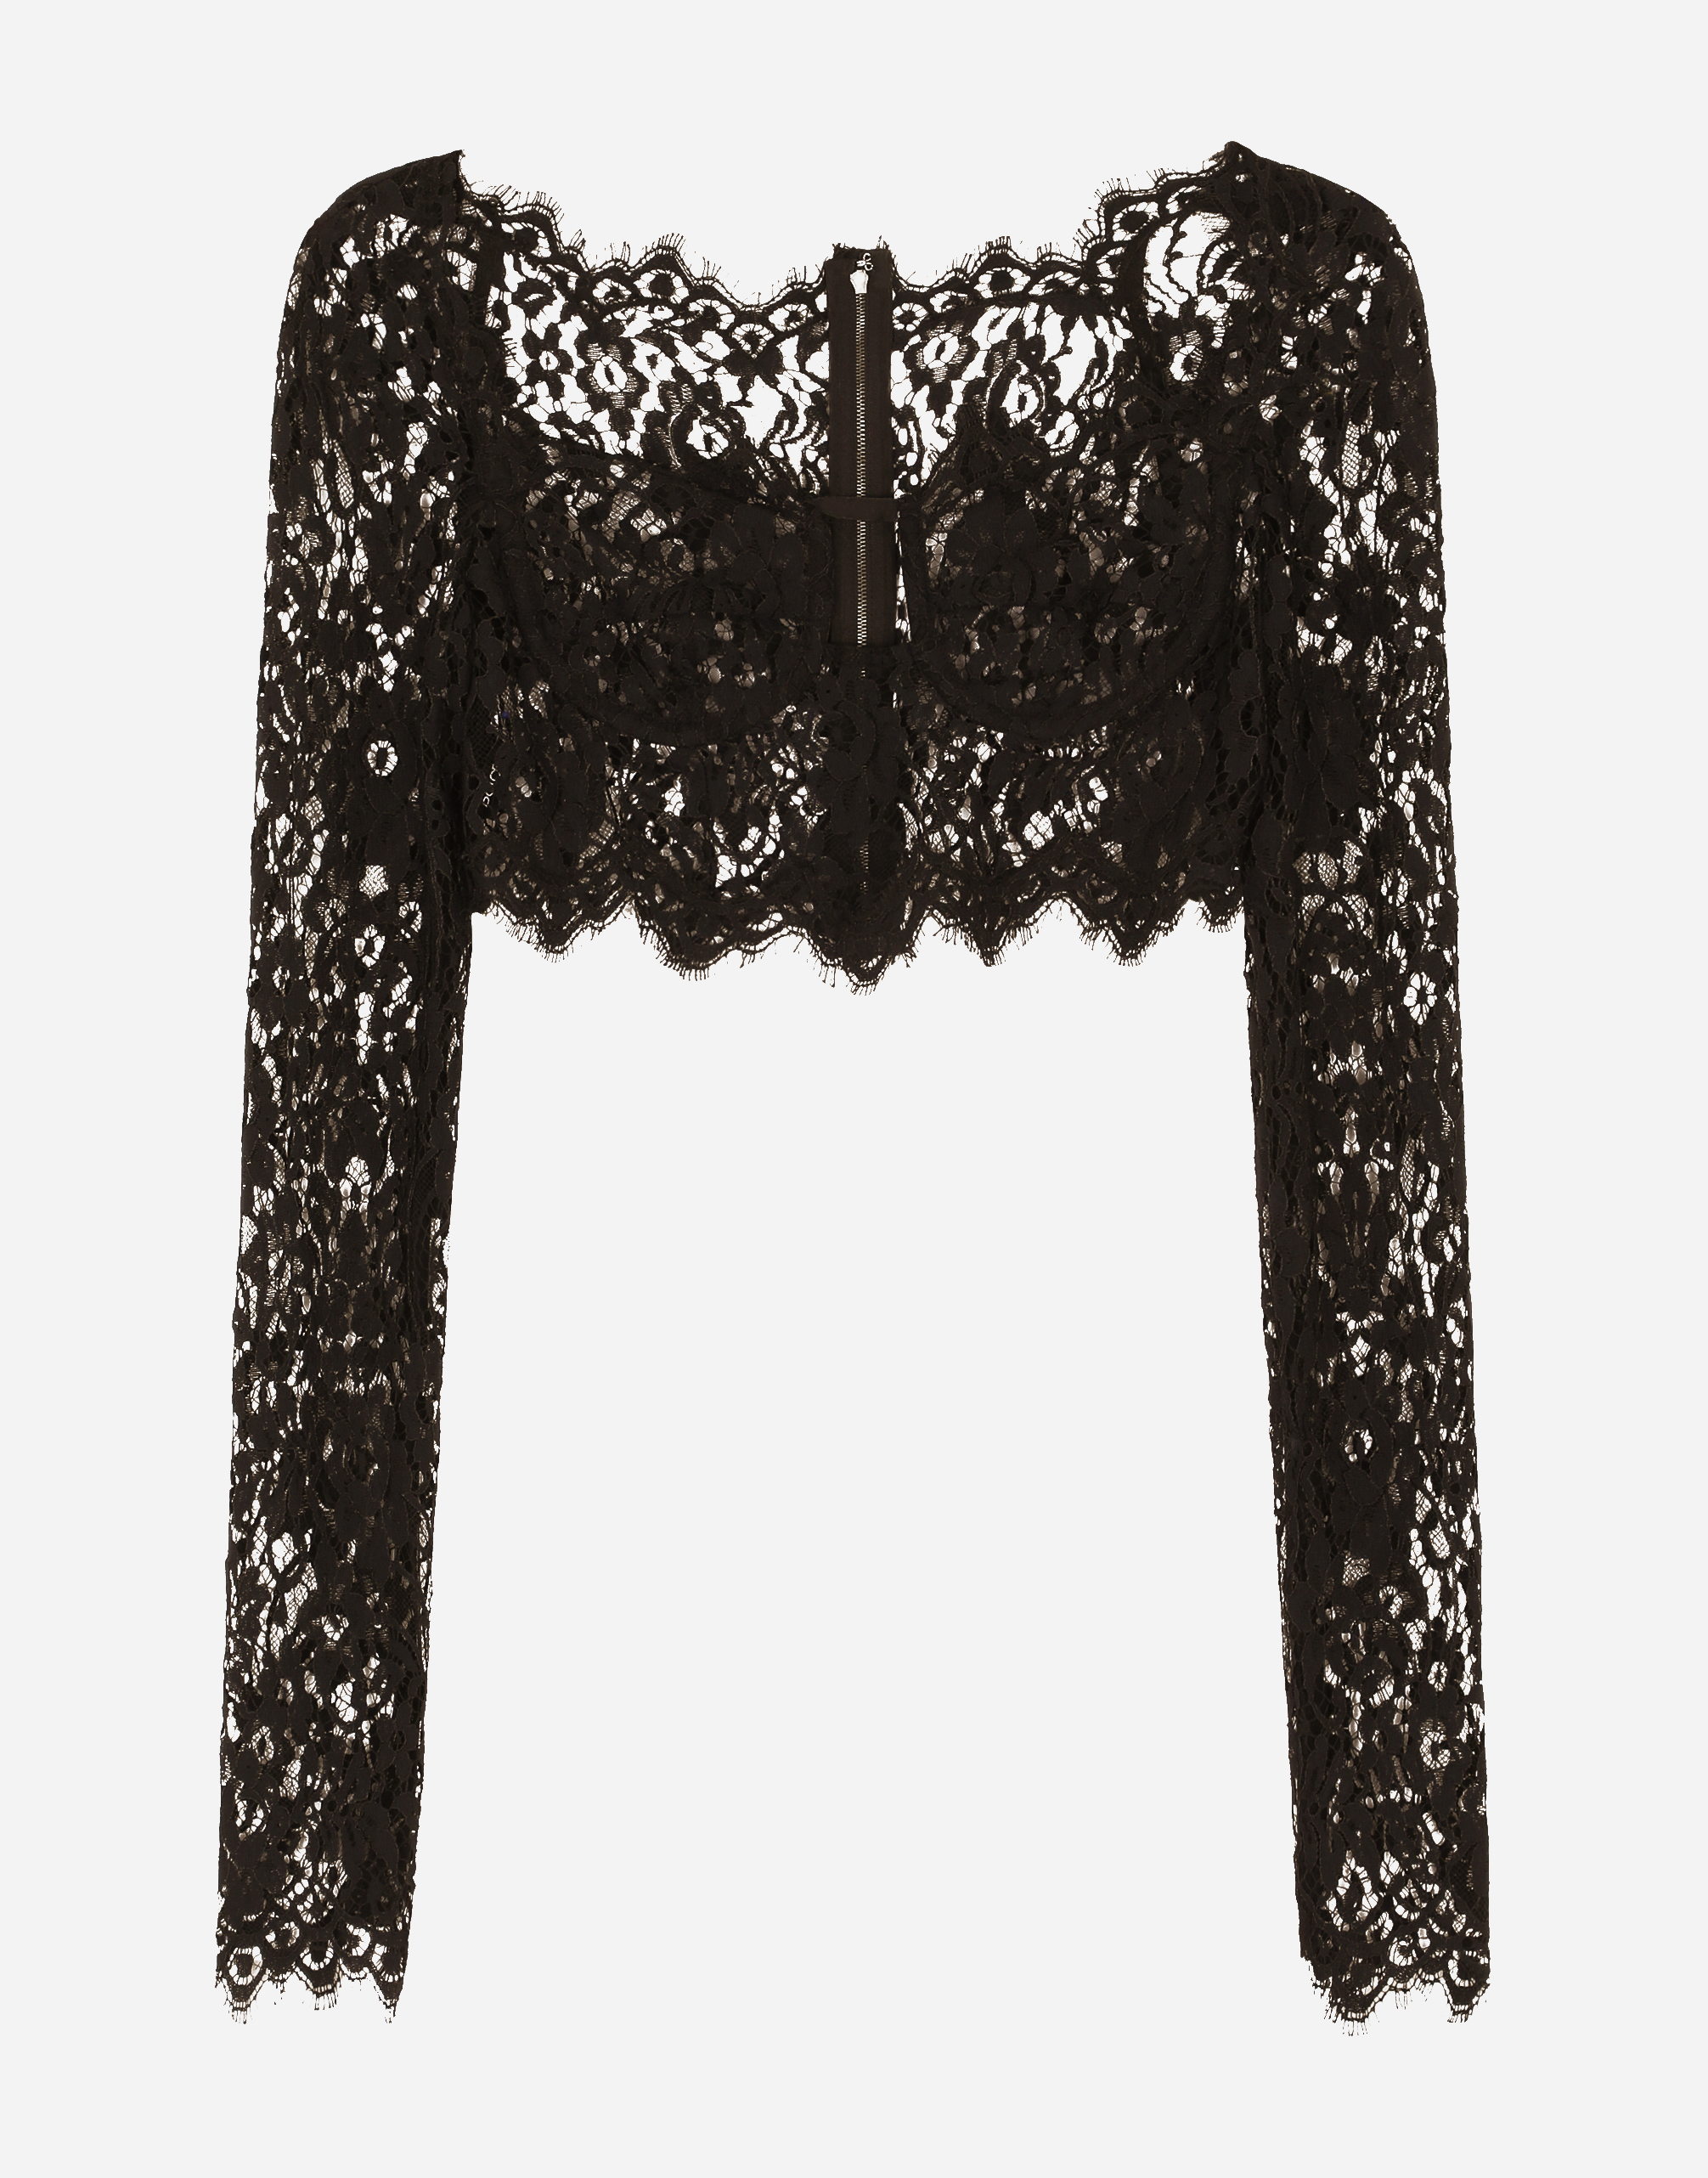 Long-sleeved lace corset top in Black